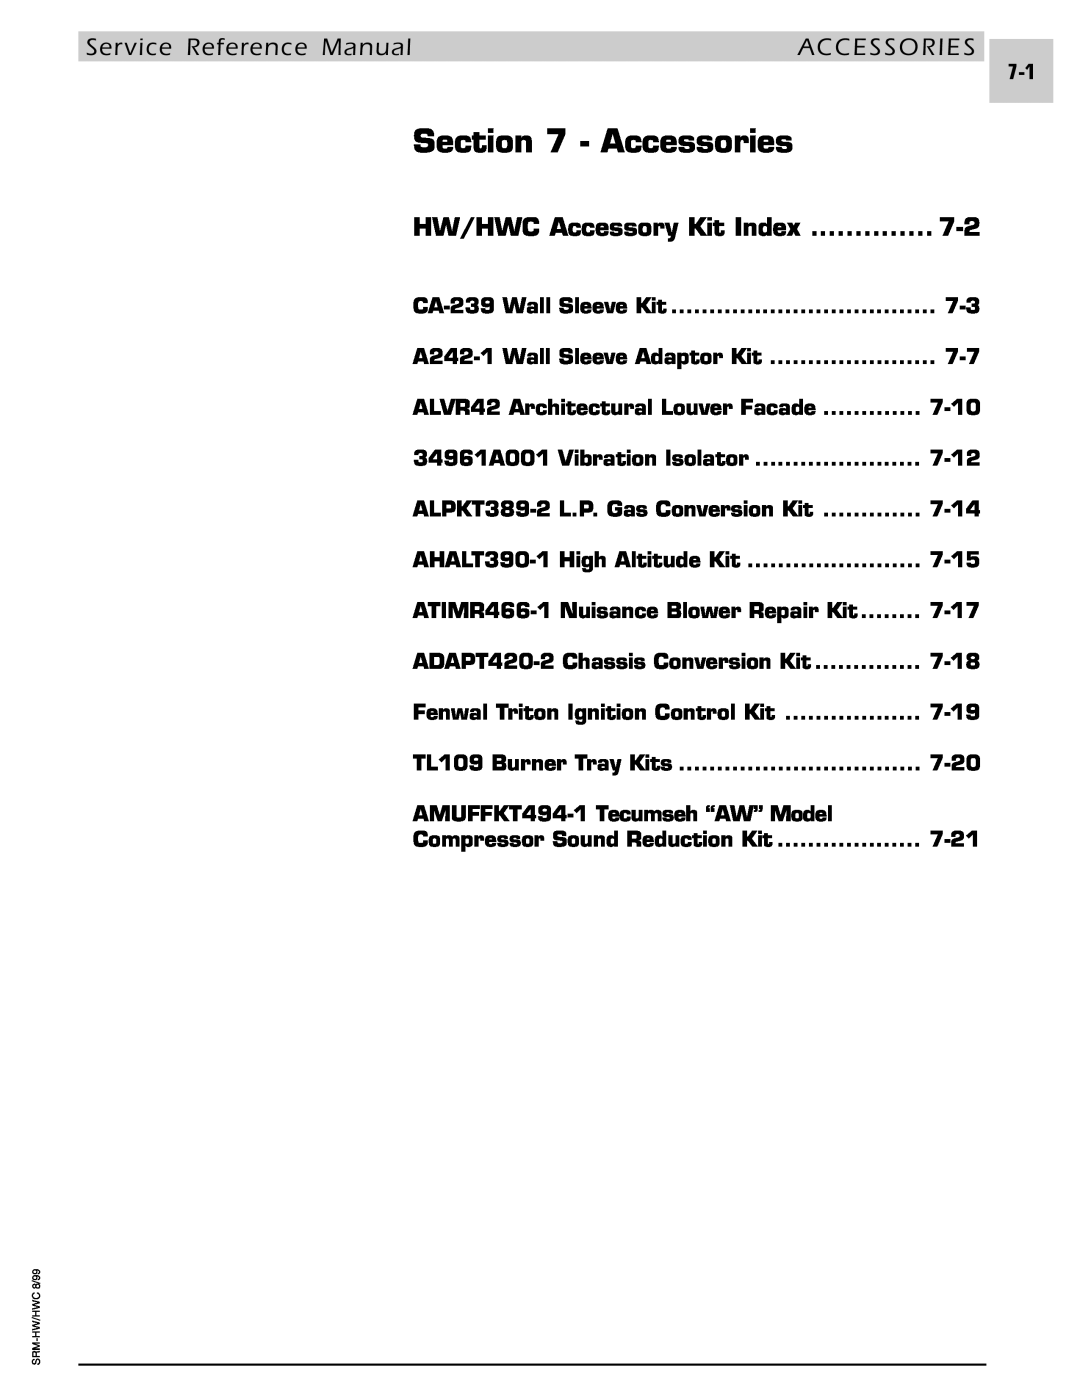 Armstrong World Industries 122, 243, 302, 242, 123, 203, 182 Accessories, Service Reference Manual, HW/HWC Accessory Kit Index 